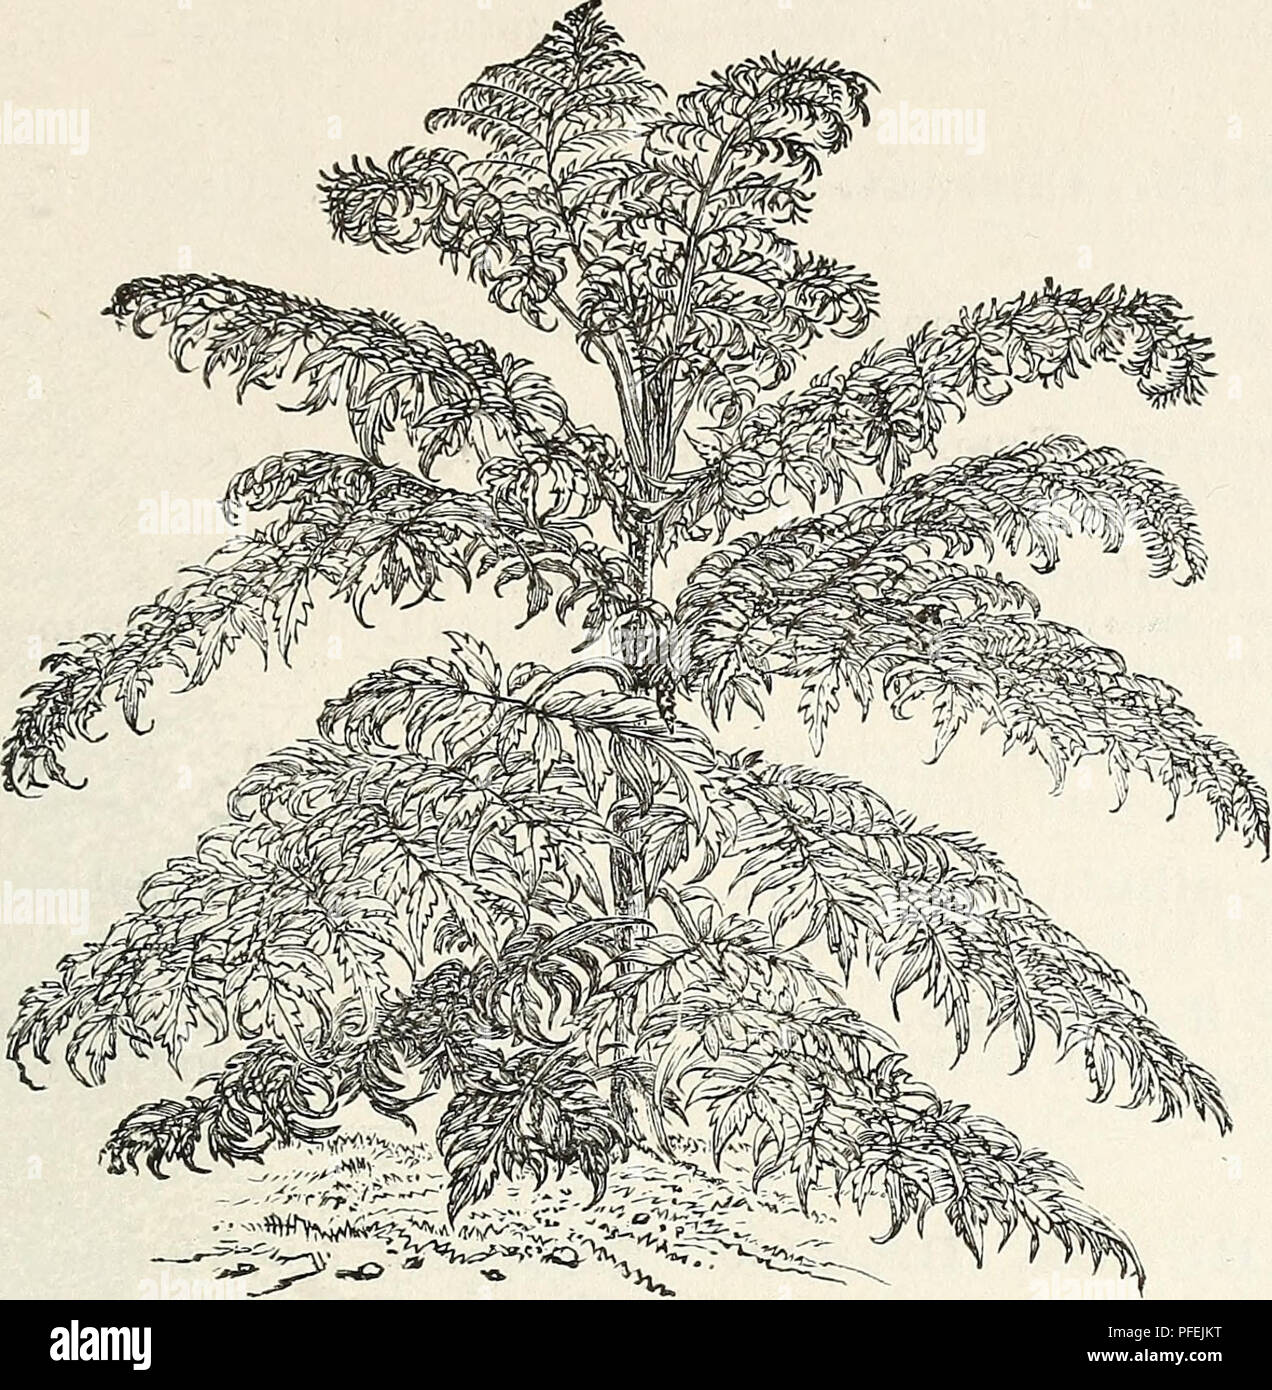 . Descriptive catalogue of ornamental trees, shrubs, hardy perennial plants, etc. : twenty-fifth edition. Ornamental trees Catalogs; Shrubs Catalogs; Roses Catalogs; Flowers Catalogs. OENAMENTAL TREES, SHRUBS, ETC.. KHUS GLABRA VAR. LACINIATA—CUT-LEAVED SUMACH. P. virg'ata flore rosea pleno. Flowers double, rose colored; not so full as those of P. tnloba, but they appear three or four days earlier. 50 cents. PTELEA. Hop Tree, or Shrubby Trefoil. Lederblume, Ger. Ptelea, Fr. P. trifoliata. A large shrub or small tree, of rapid growth and robust habit. Fruit winged, and in clusters; flowers in J Stock Photo